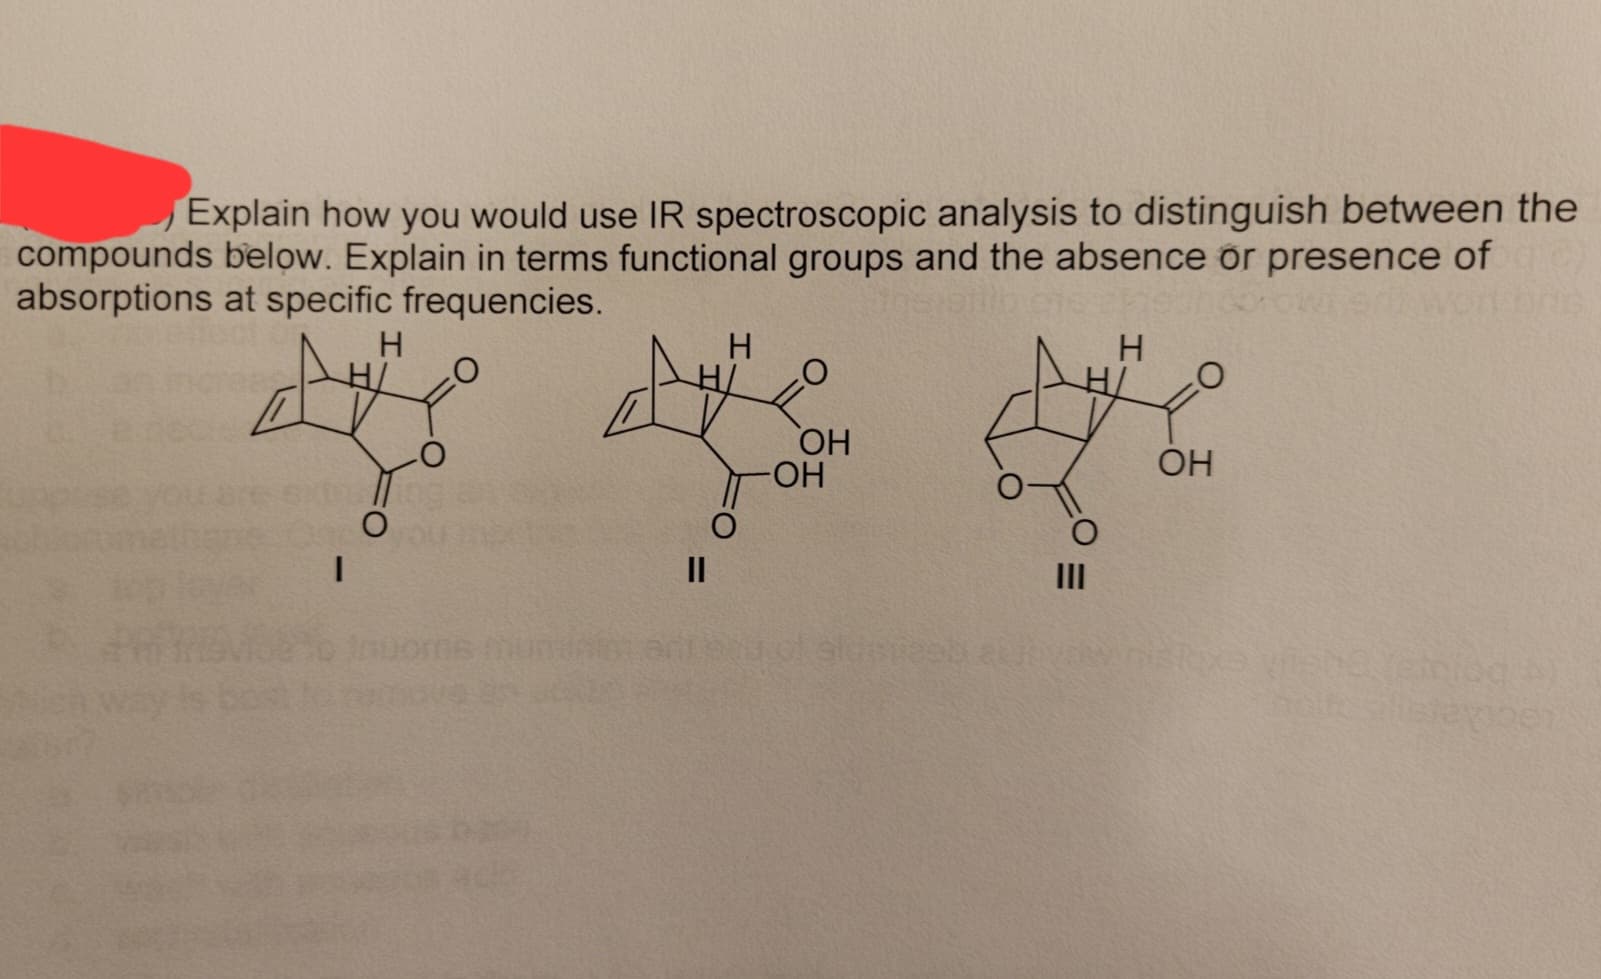 Explain how you would use IR spectroscopic analysis to distinguish between the
compounds below. Explain in terms functional groups and the absence or presence of
absorptions at specific frequencies.
insignibic
A
I
O
me mundes
||
O
OH
-OH
M
H
O
Yo
OH